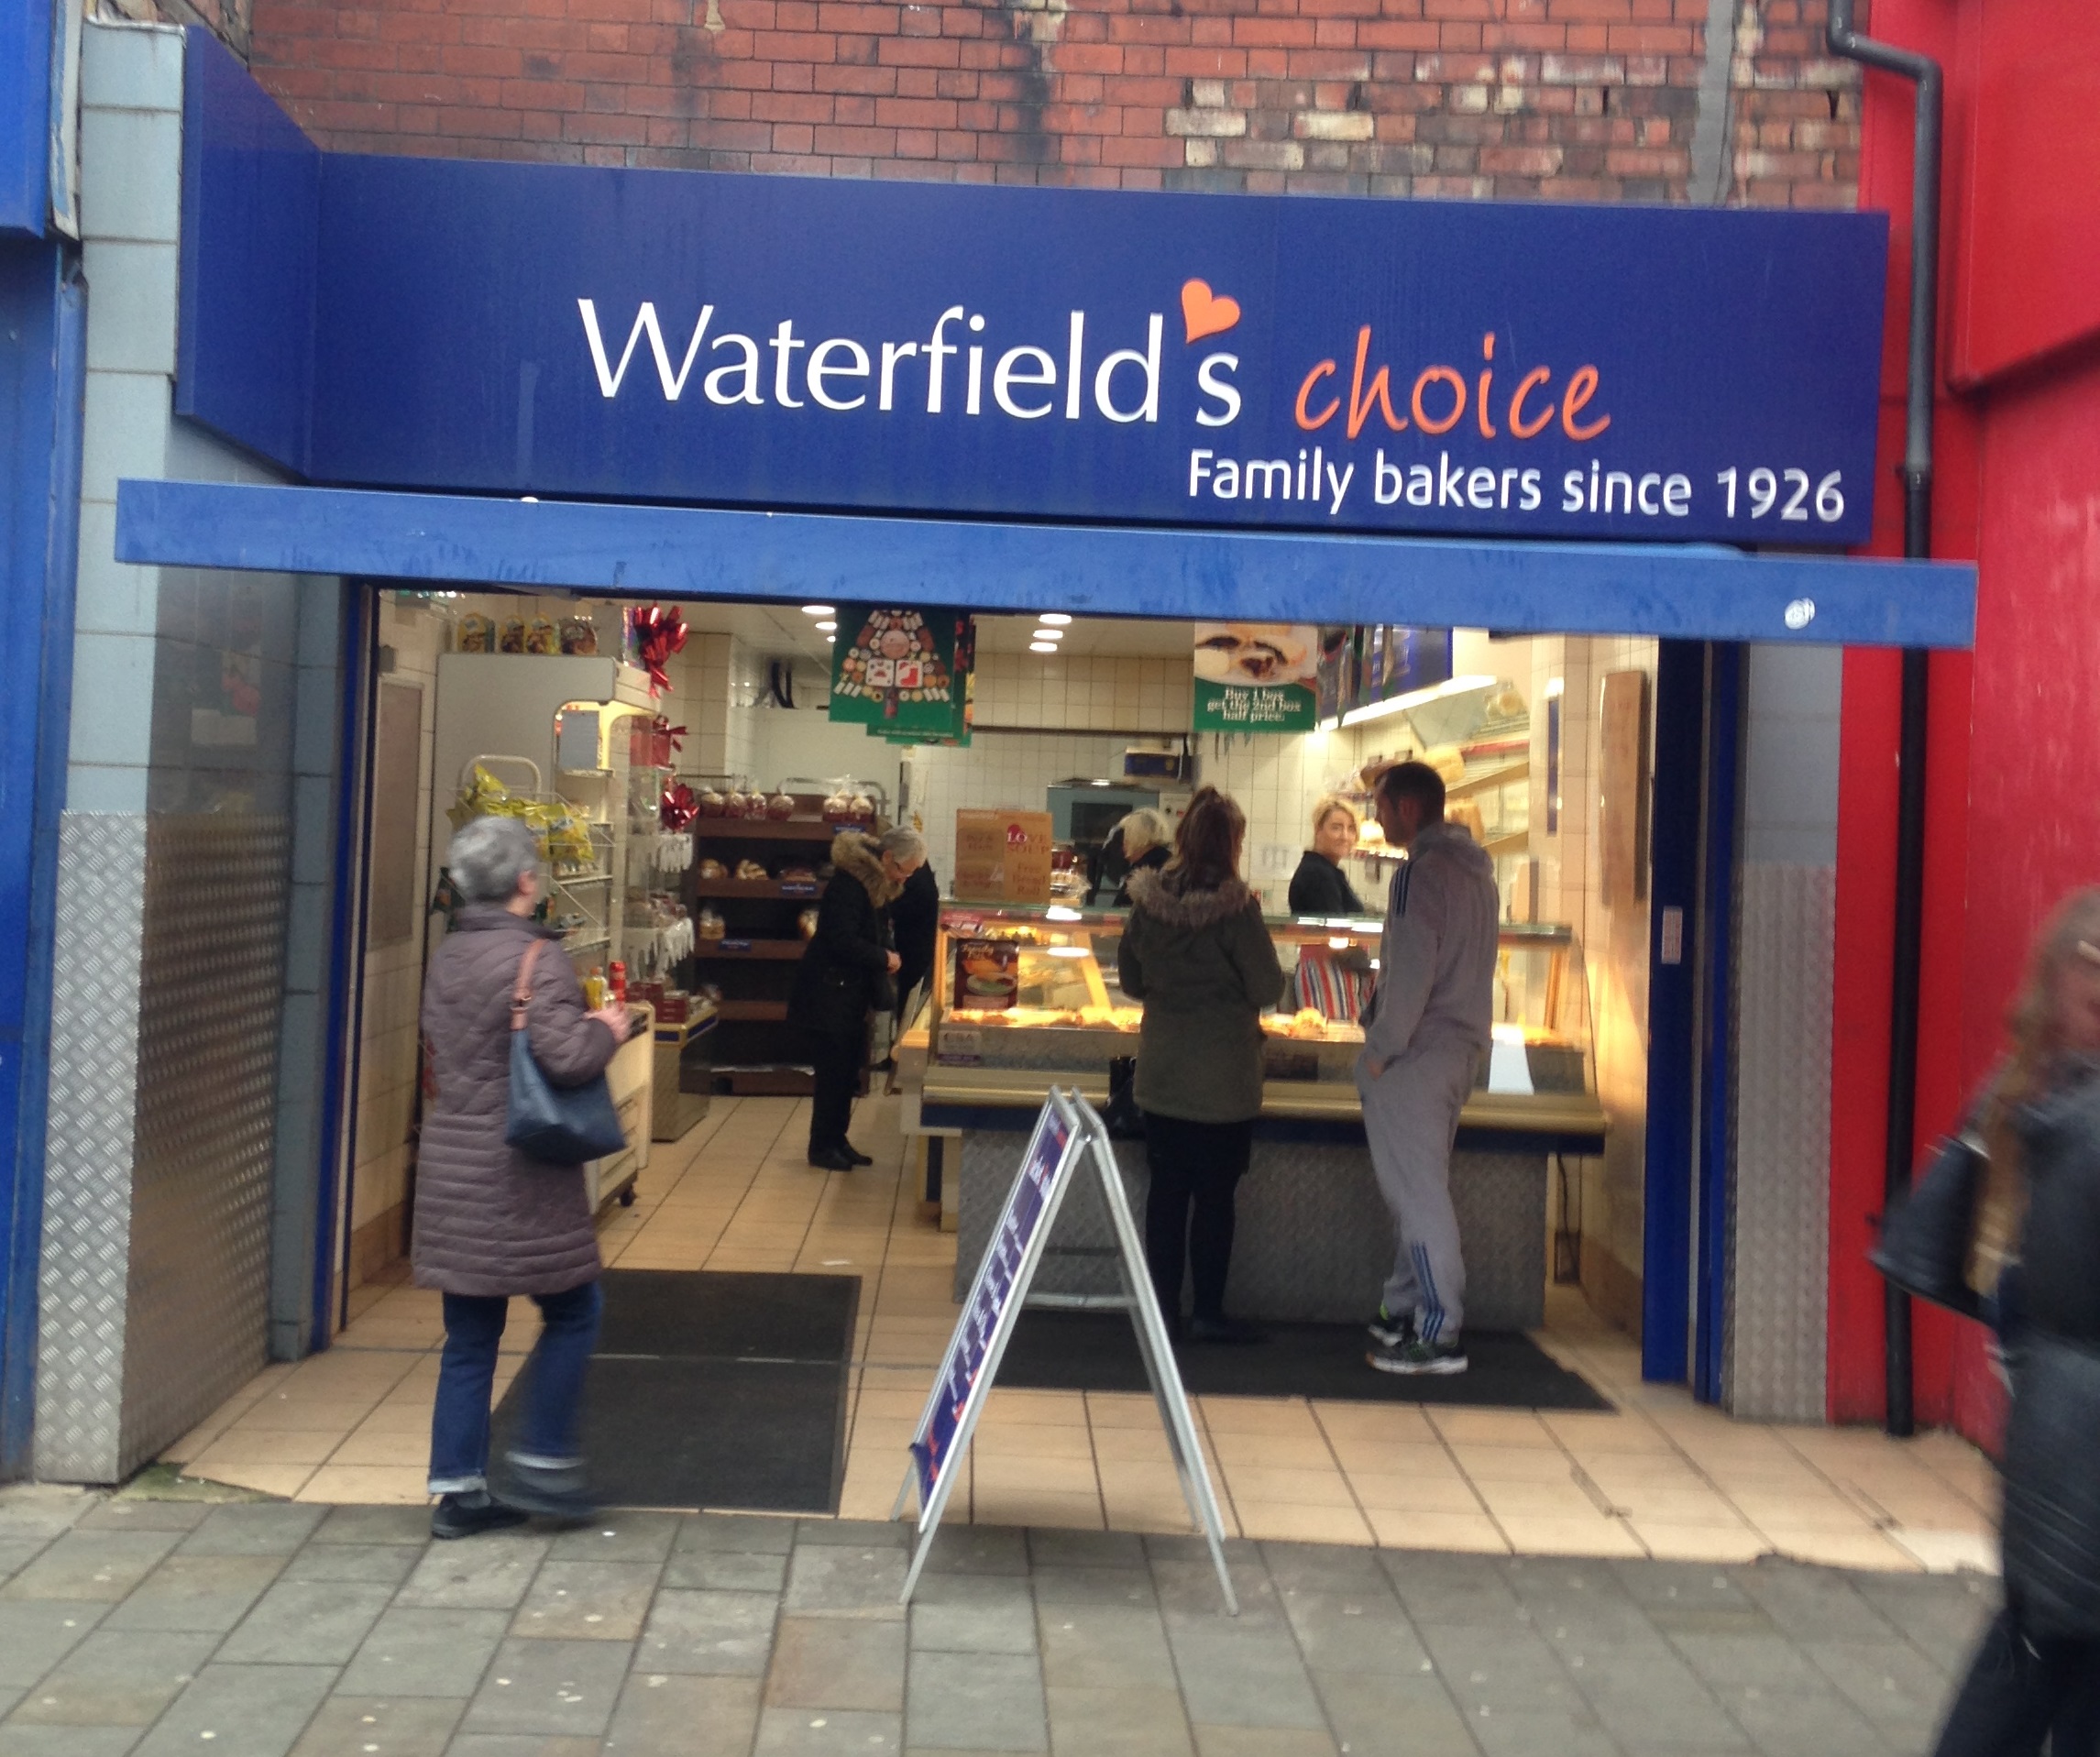 Waterfields stores in Warrington will not be affected by closures - Warrington Guardian